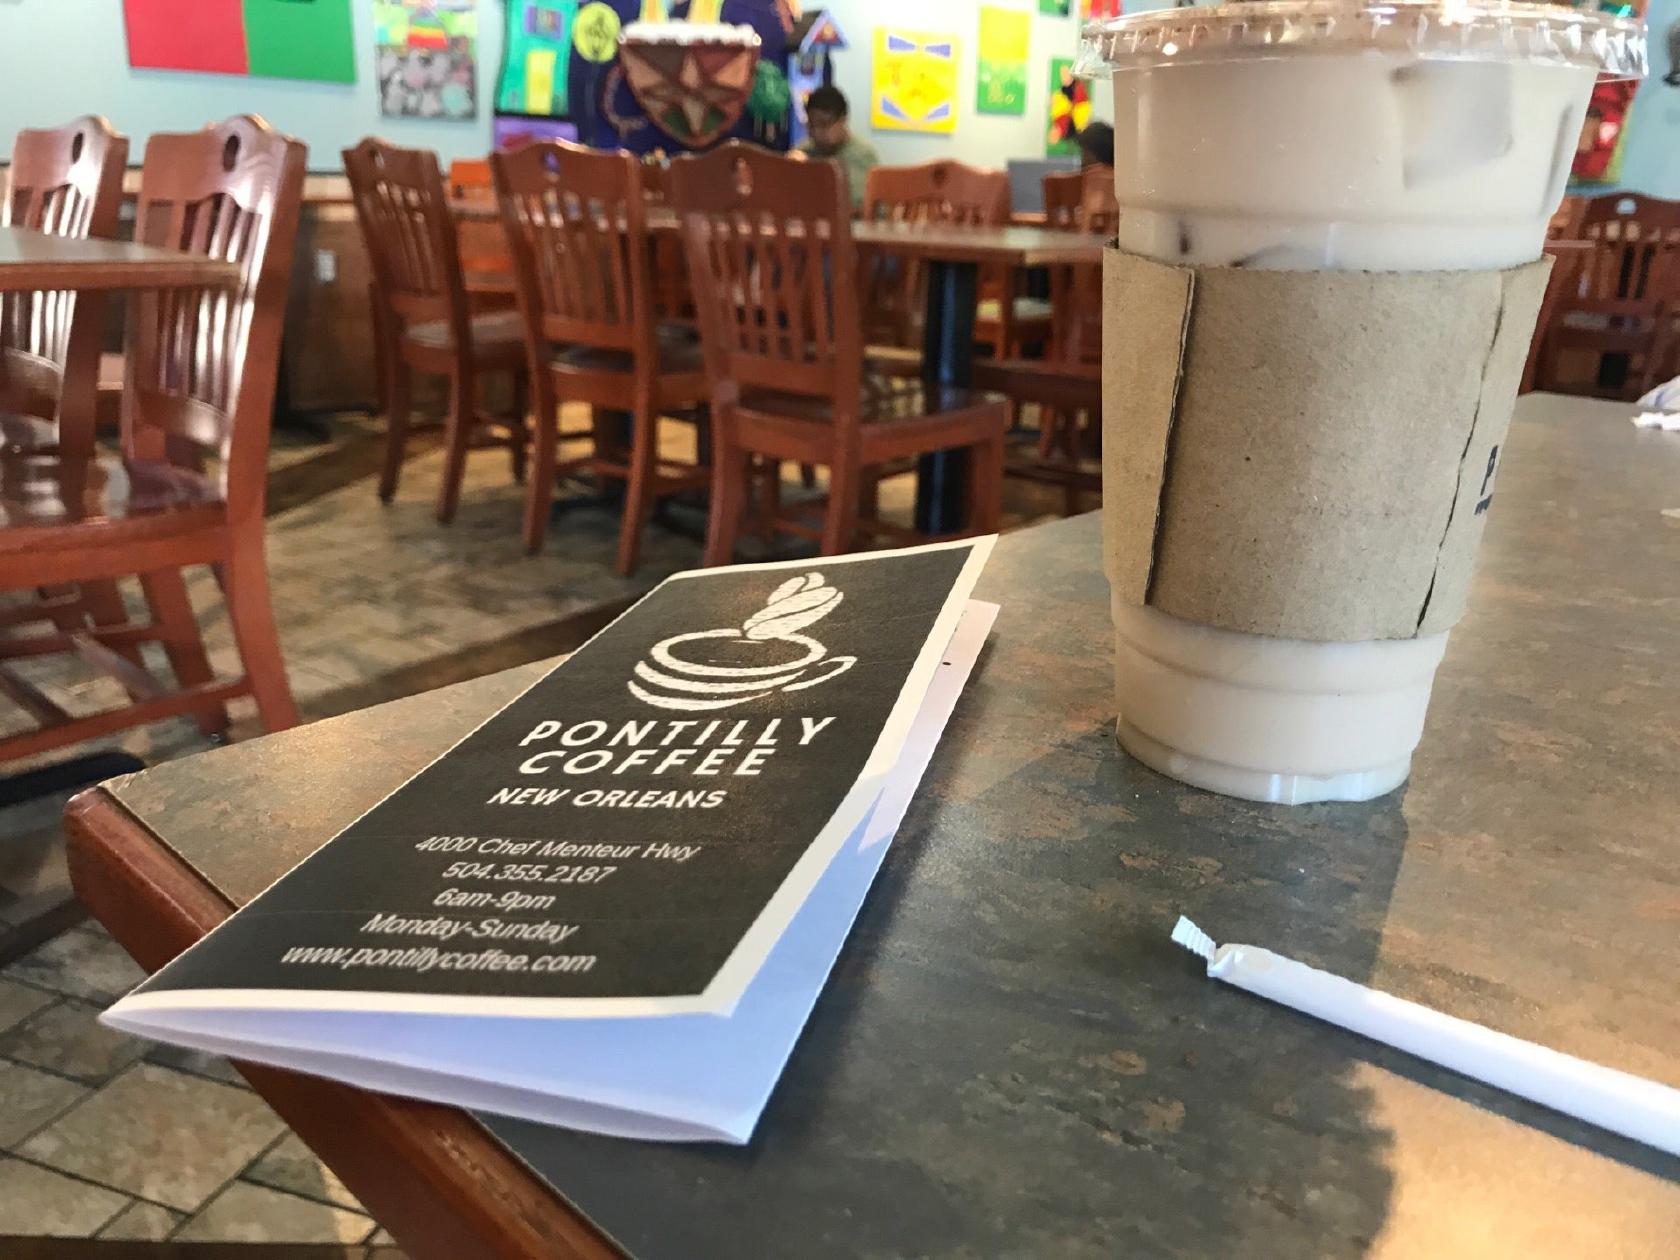 Pontilly Coffee in New Orleans - Restaurant reviews